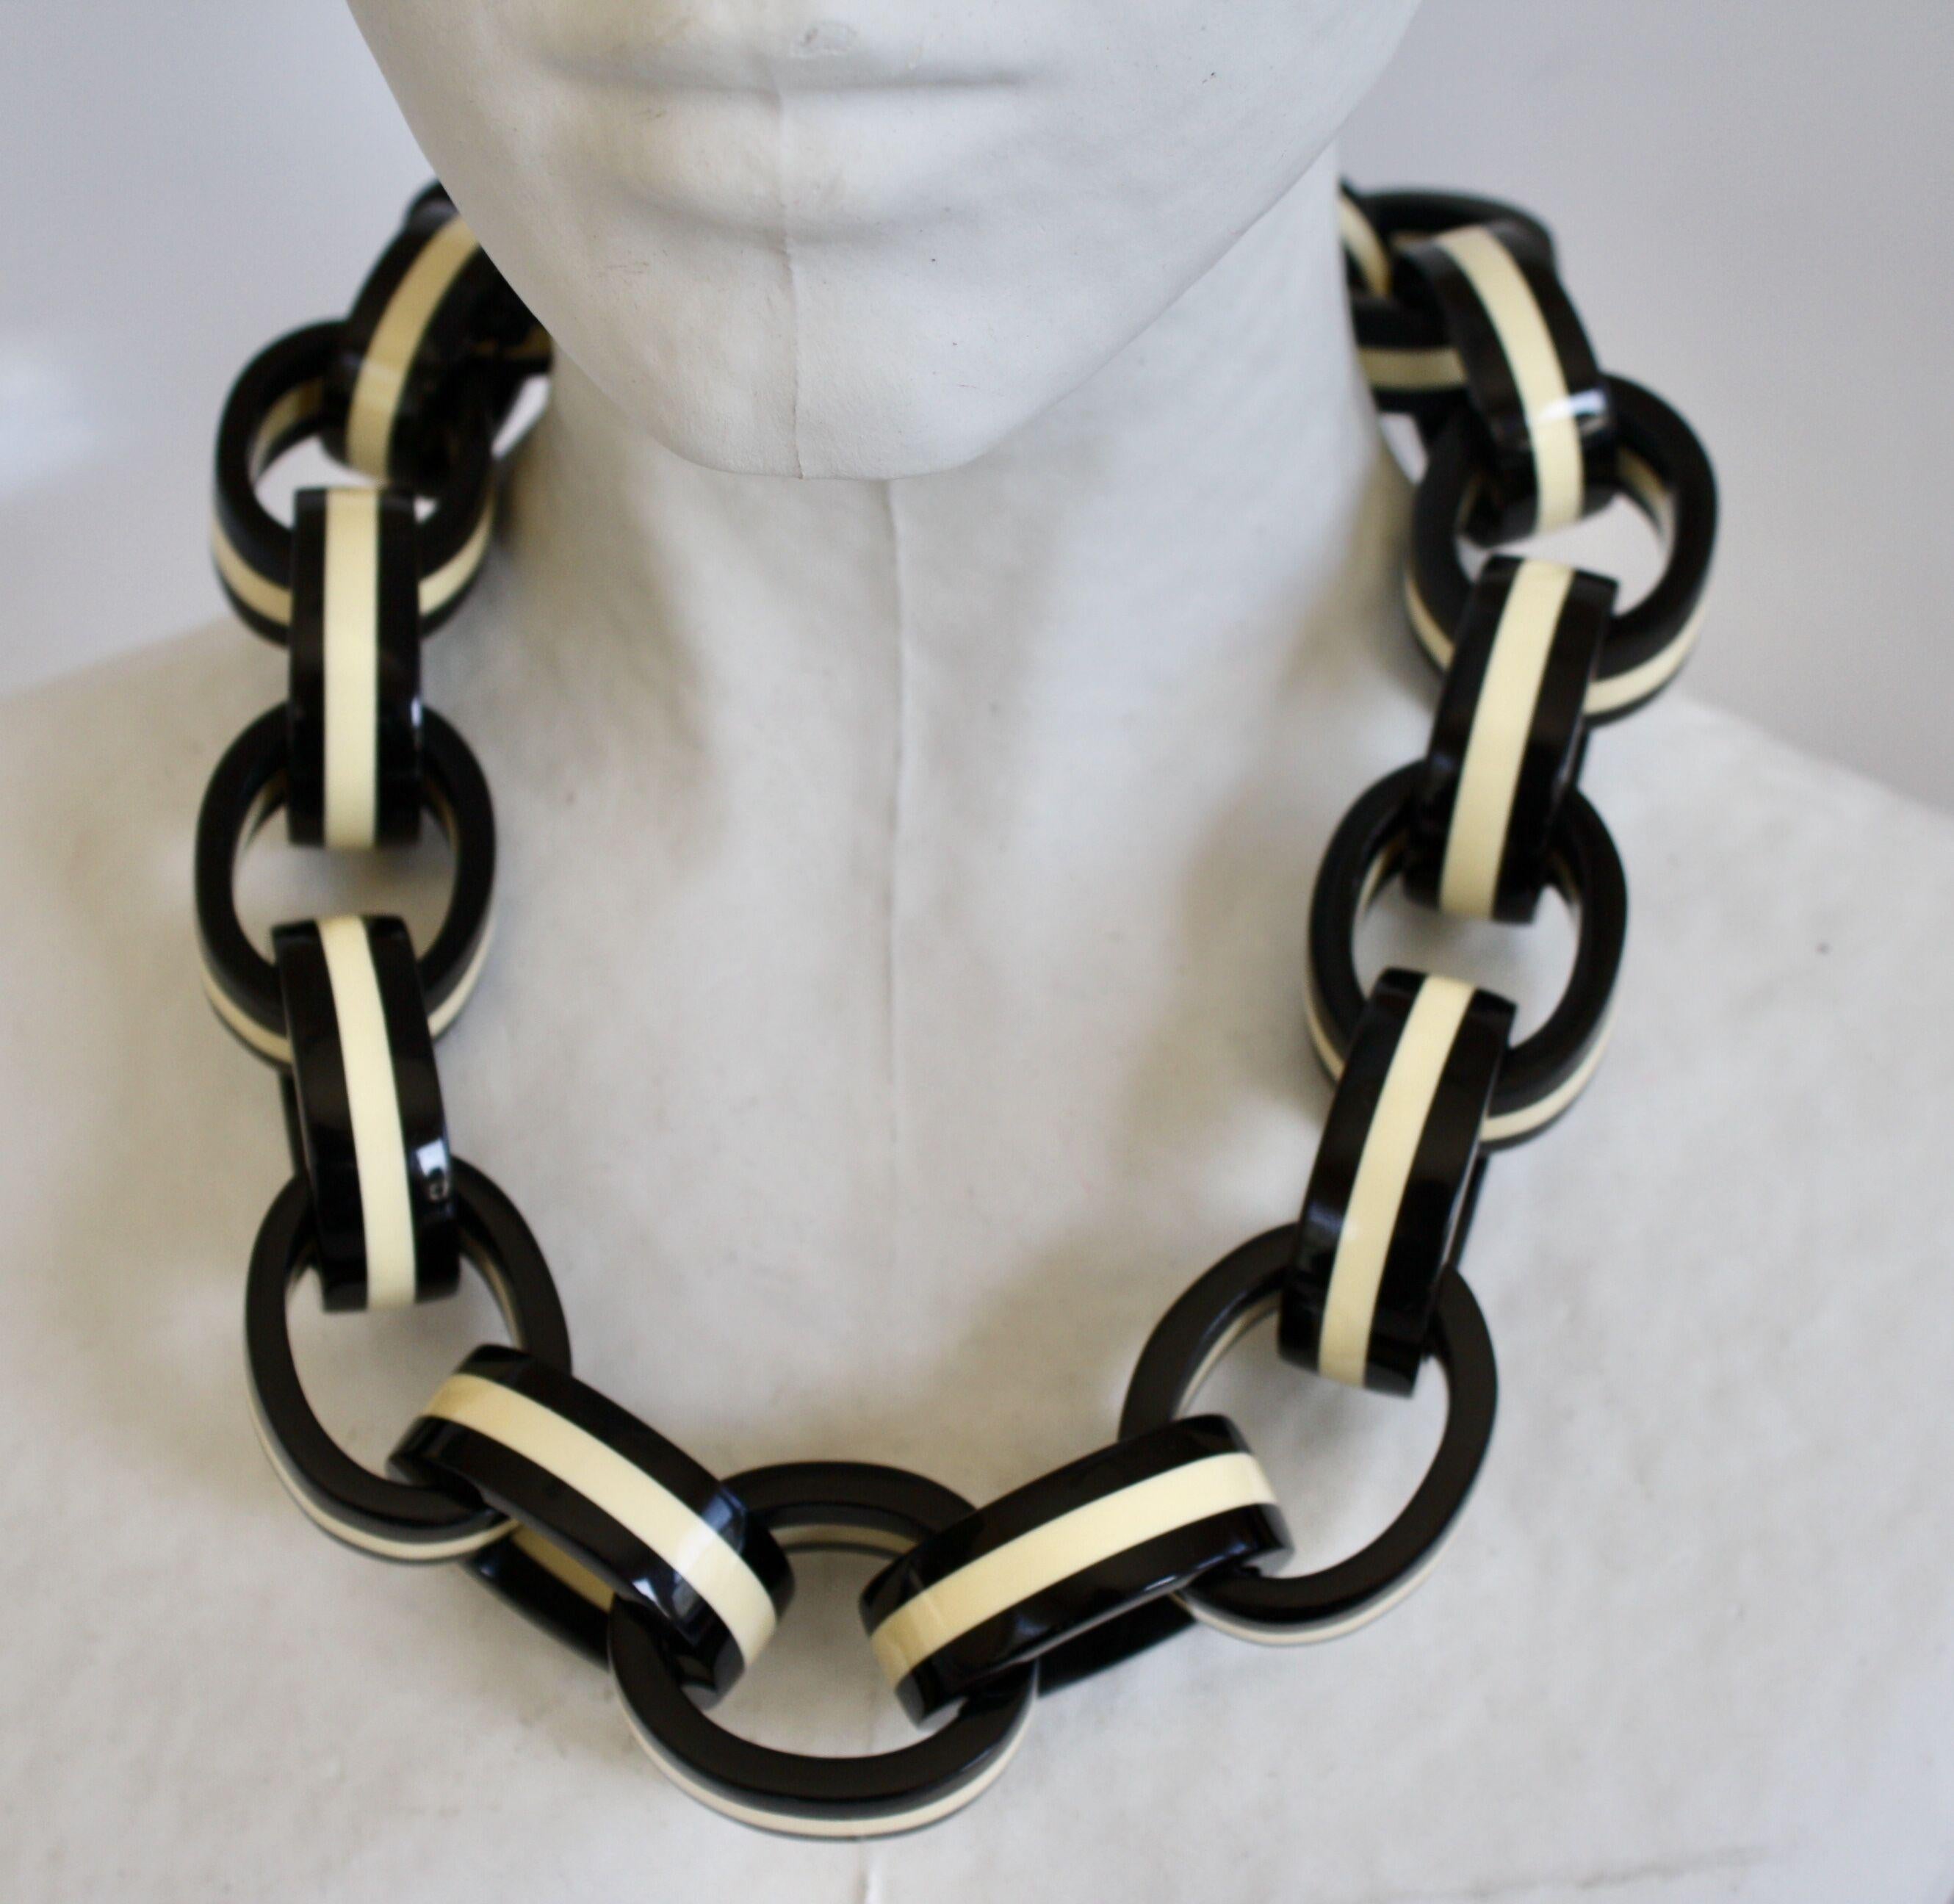 Polyester oval links necklace in black and white stripes from Monies Denmark. 

Each oval link is about 1-3/4